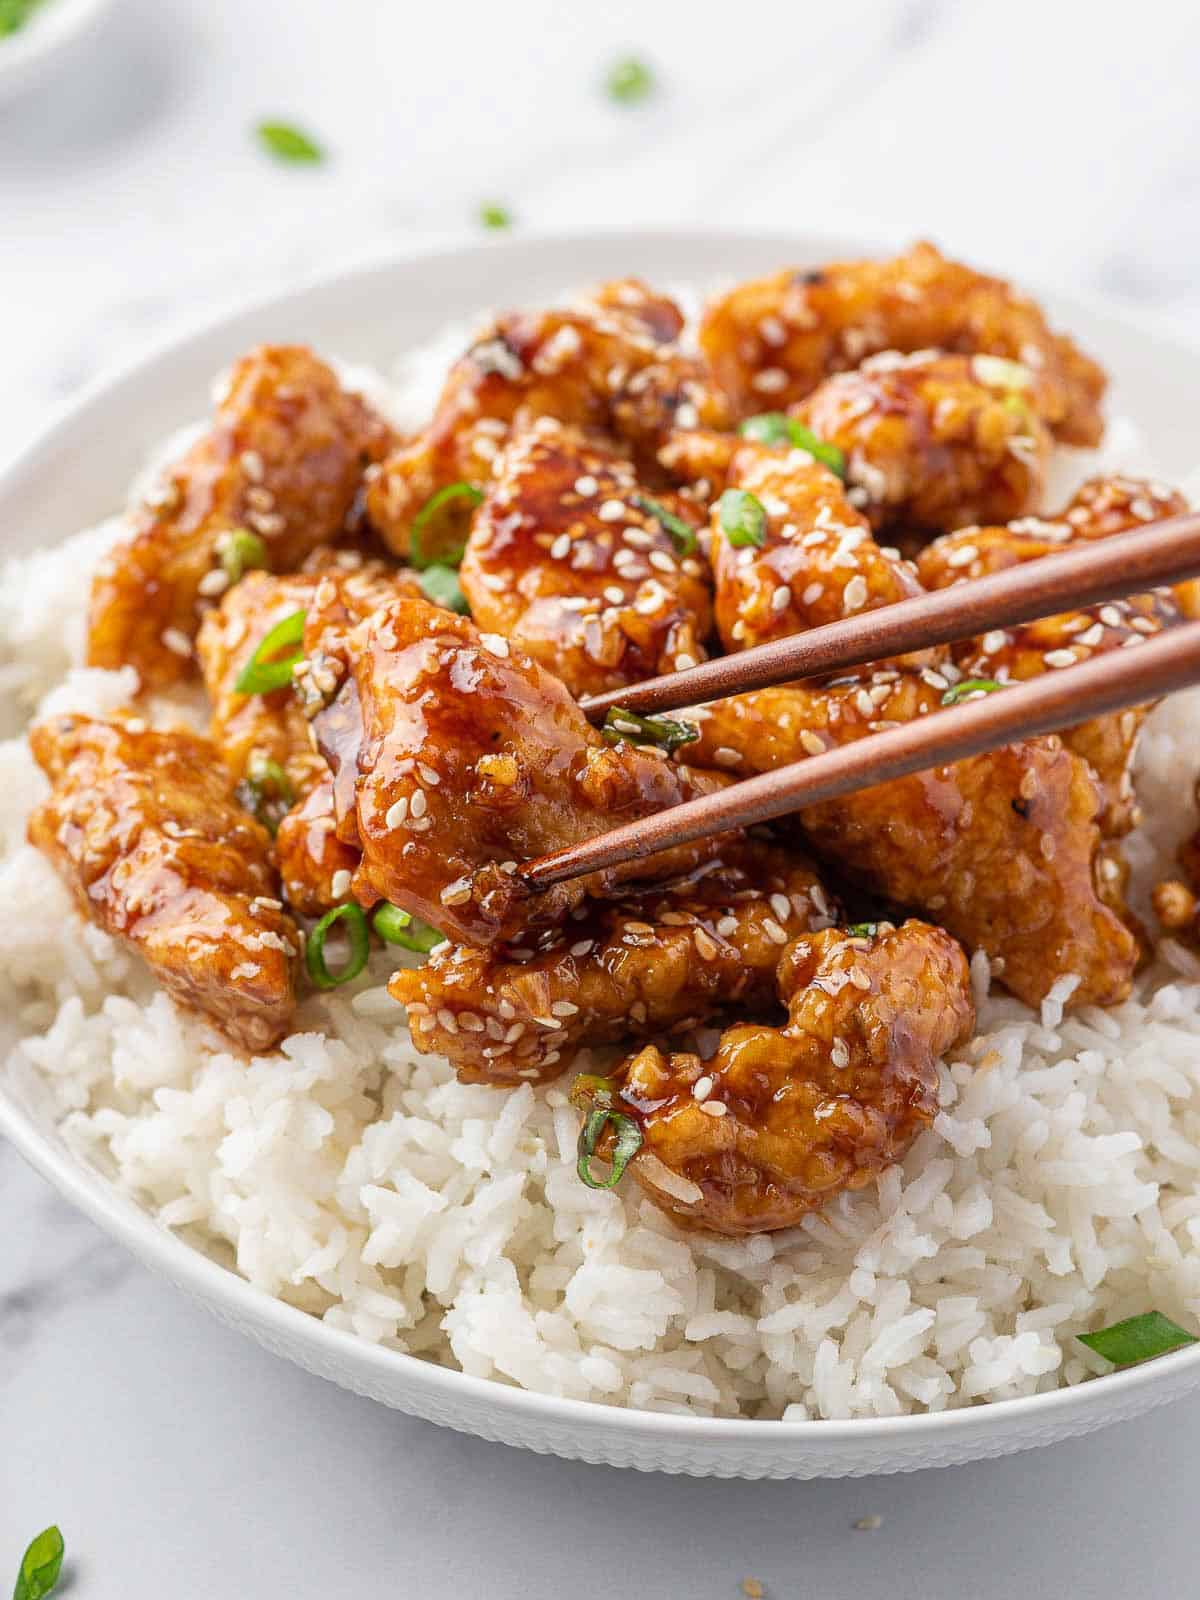 Chopstick hold a piece of crispy honey sesame chicken on a bed of white rice.